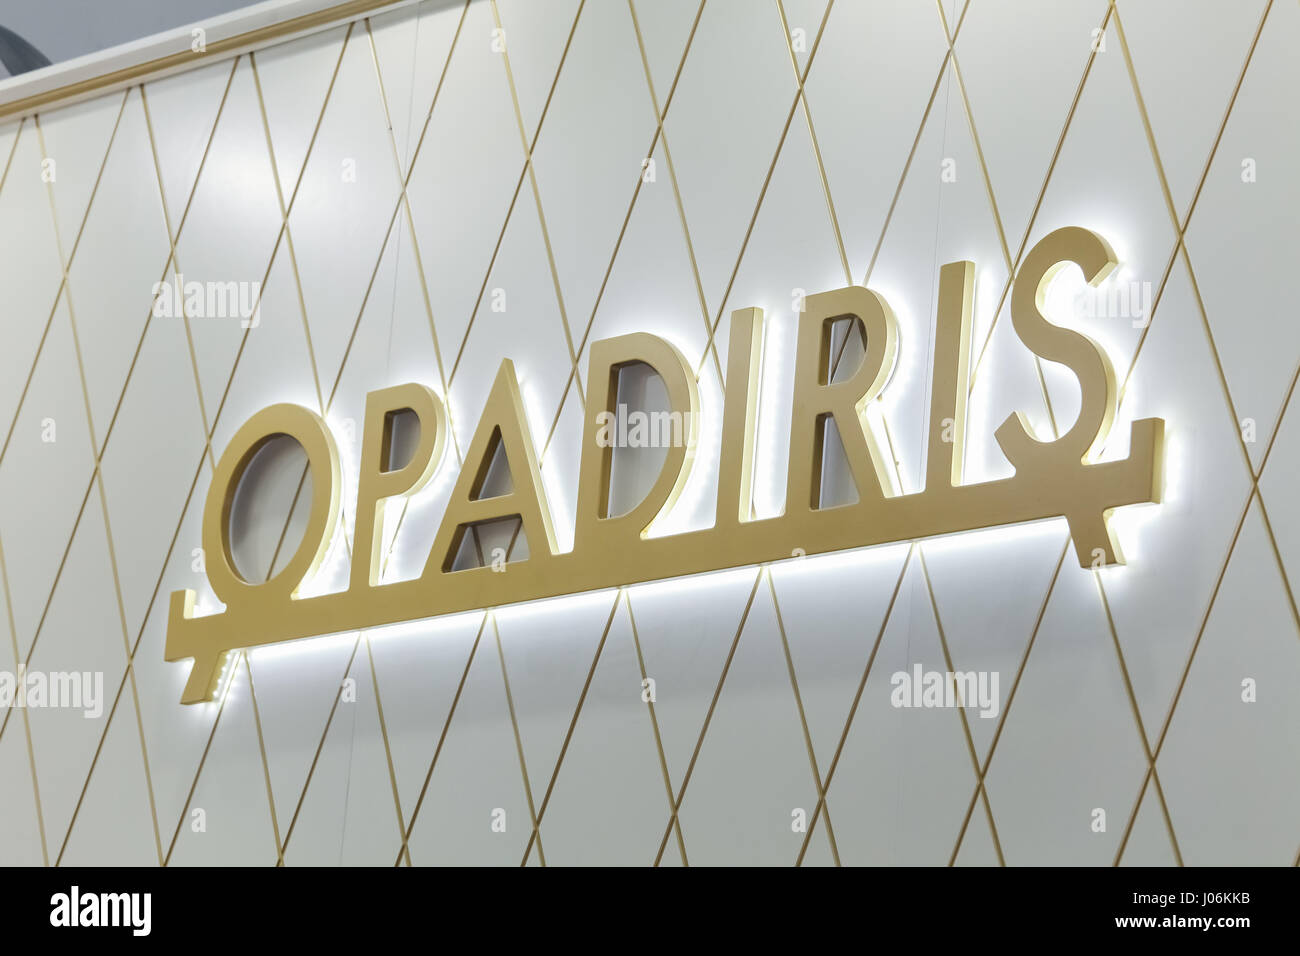 Logo sign of Opadiris company. Opadiris is a producer of sanitary products and bath furniture Stock Photo